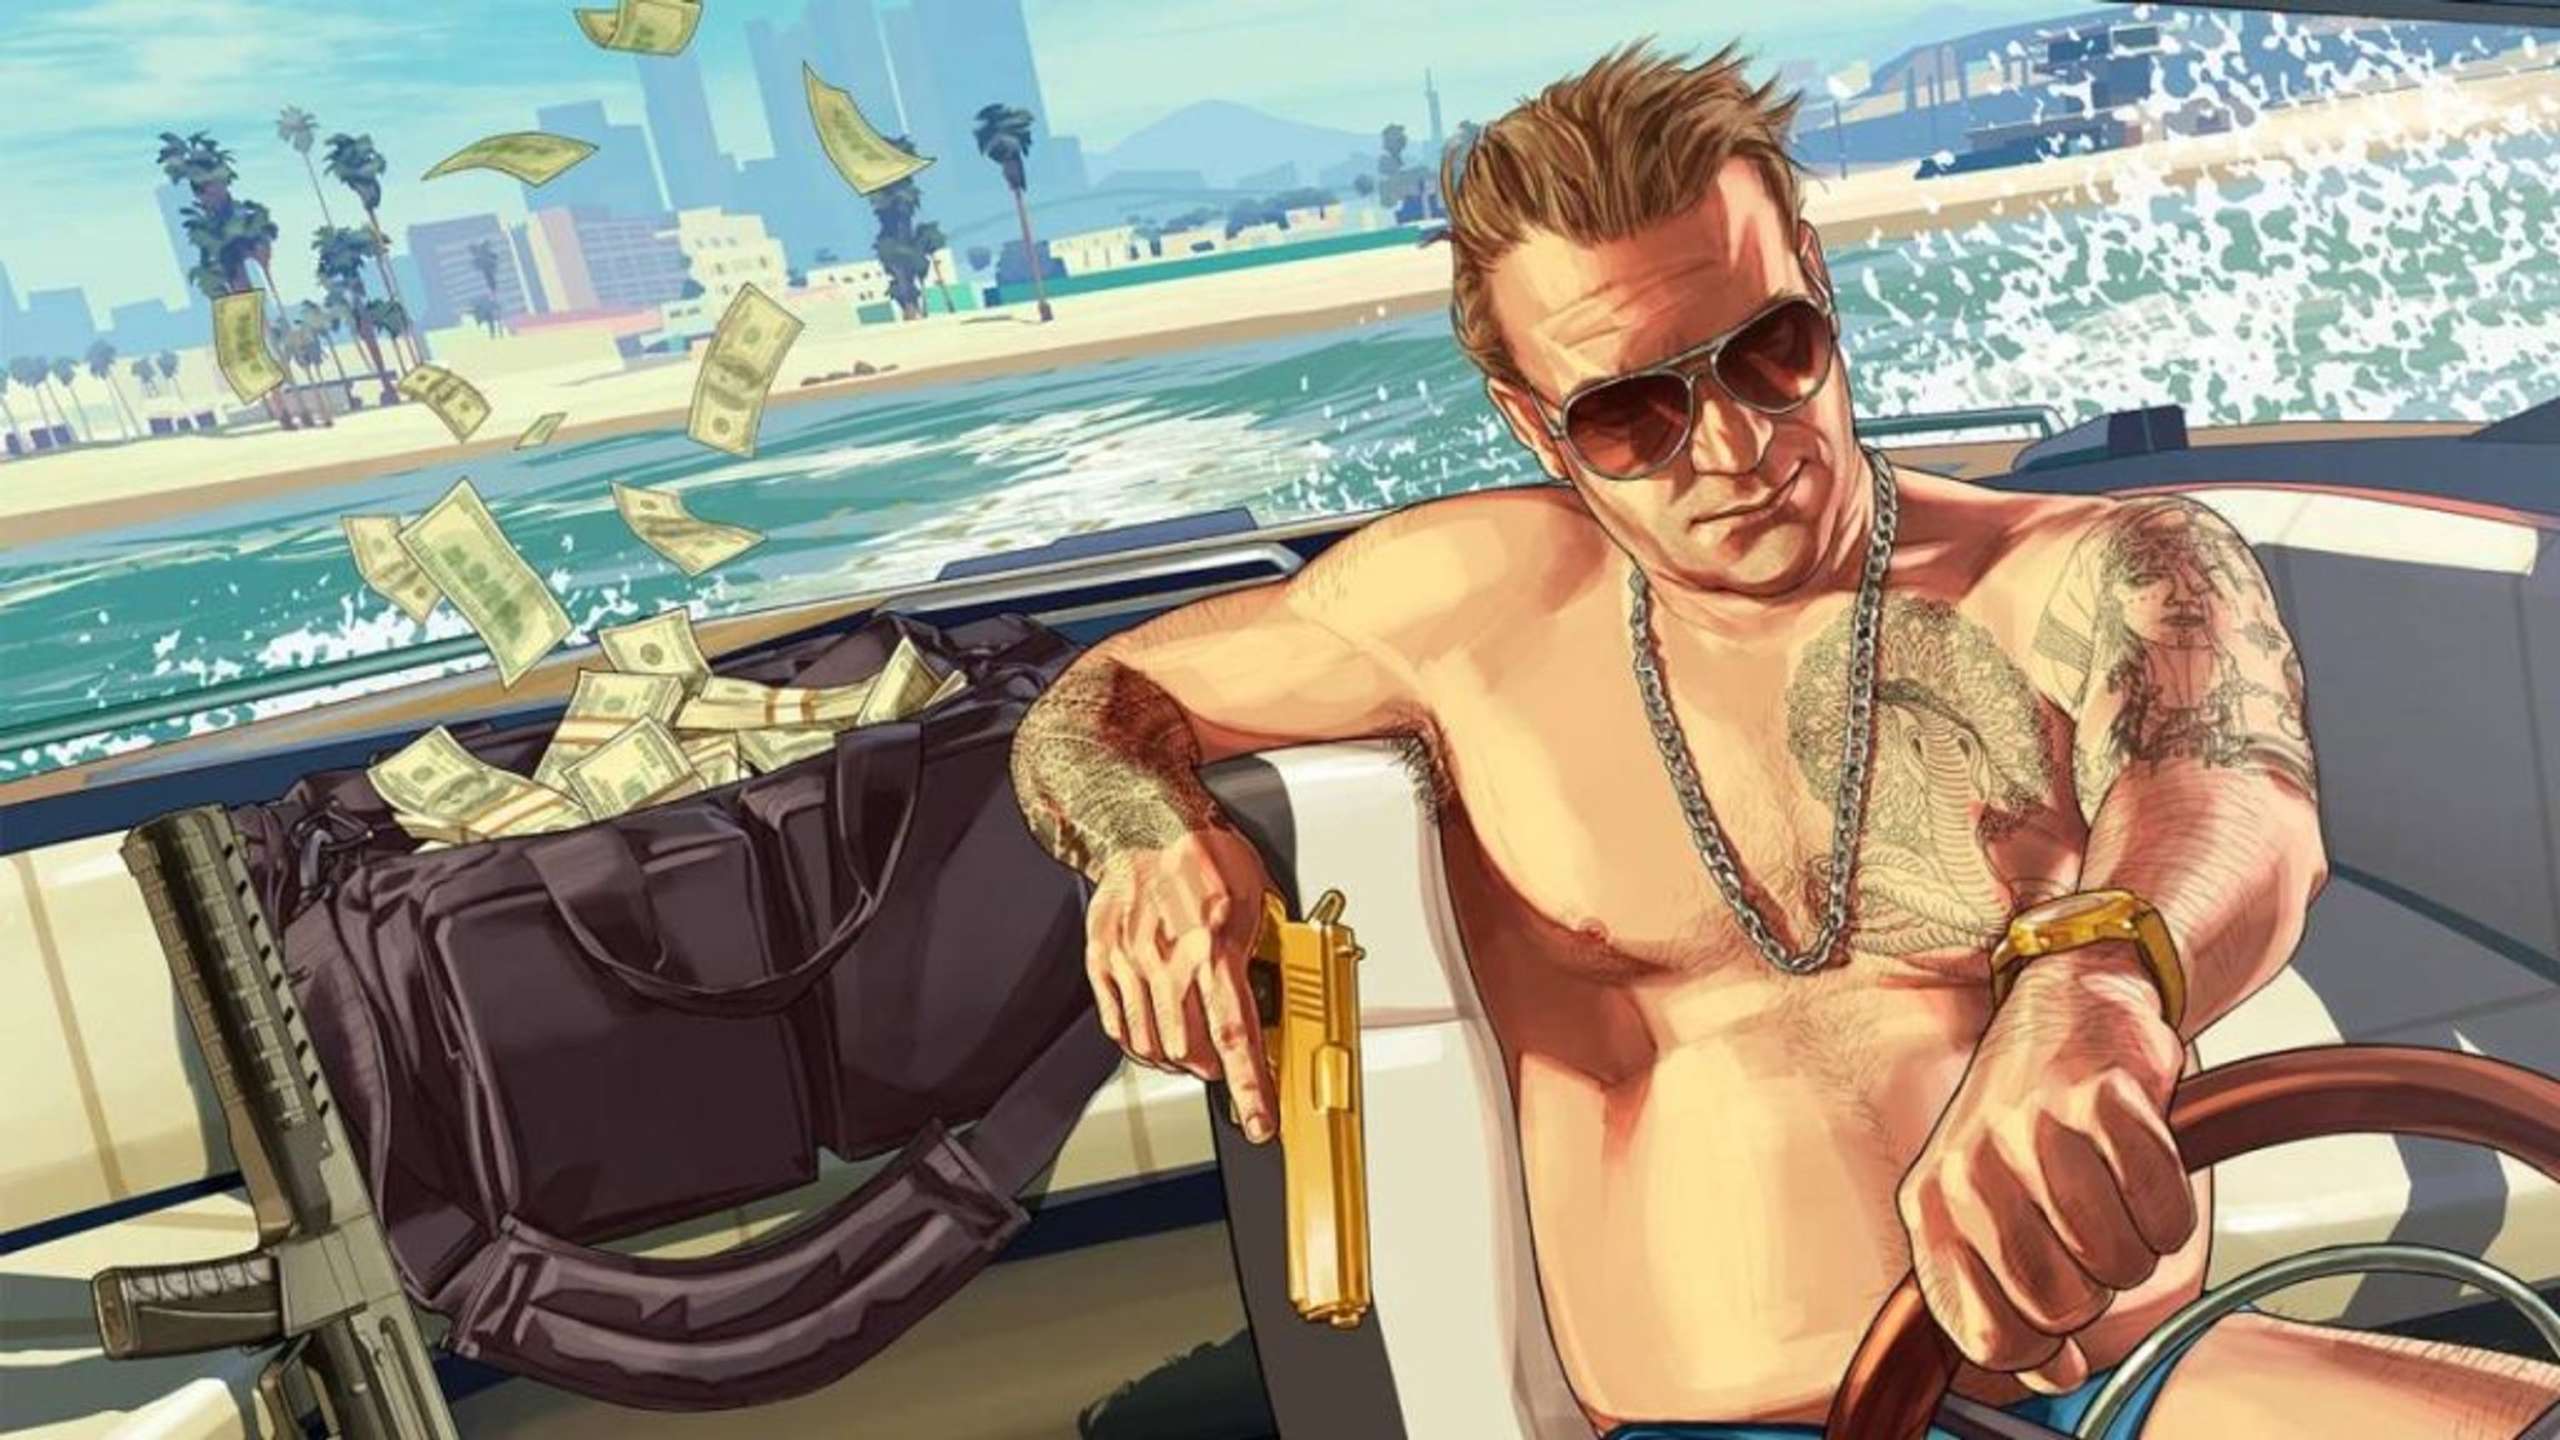 Some Of The Game’s Post-Launch Intentions May Have Been Revealed By A Recent Report About Rockstar Games’ Plans For Grand Theft Auto 6